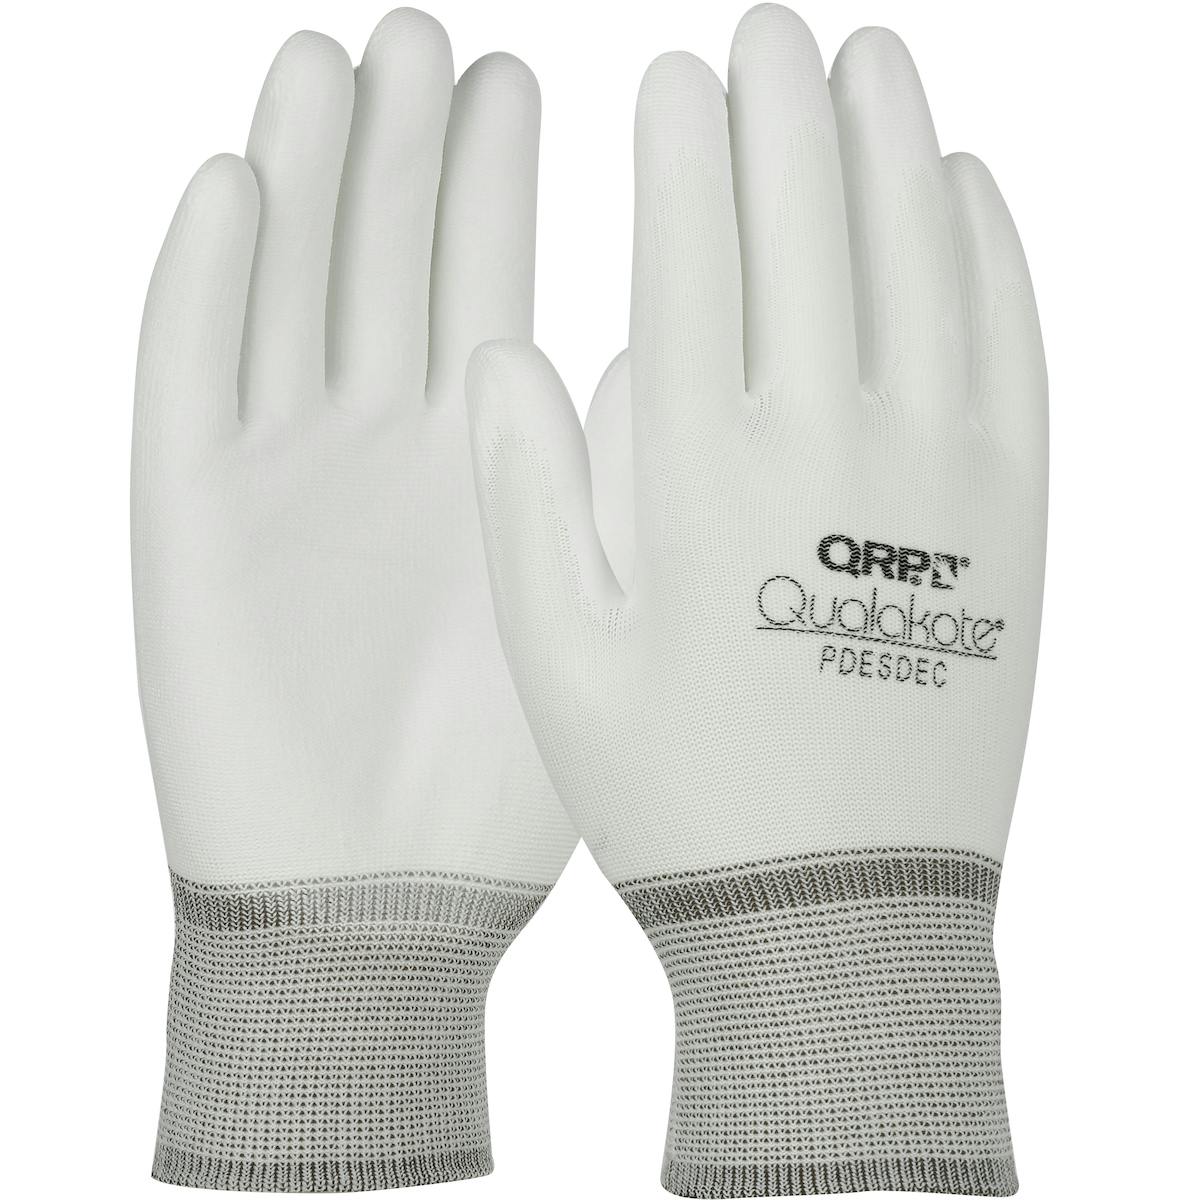 QRP® Qualakote® Seamless Knit Nylon Glove with Polyurethane Coated Microfoam Grip on Palm & Fingertips (PDESDEC)_0